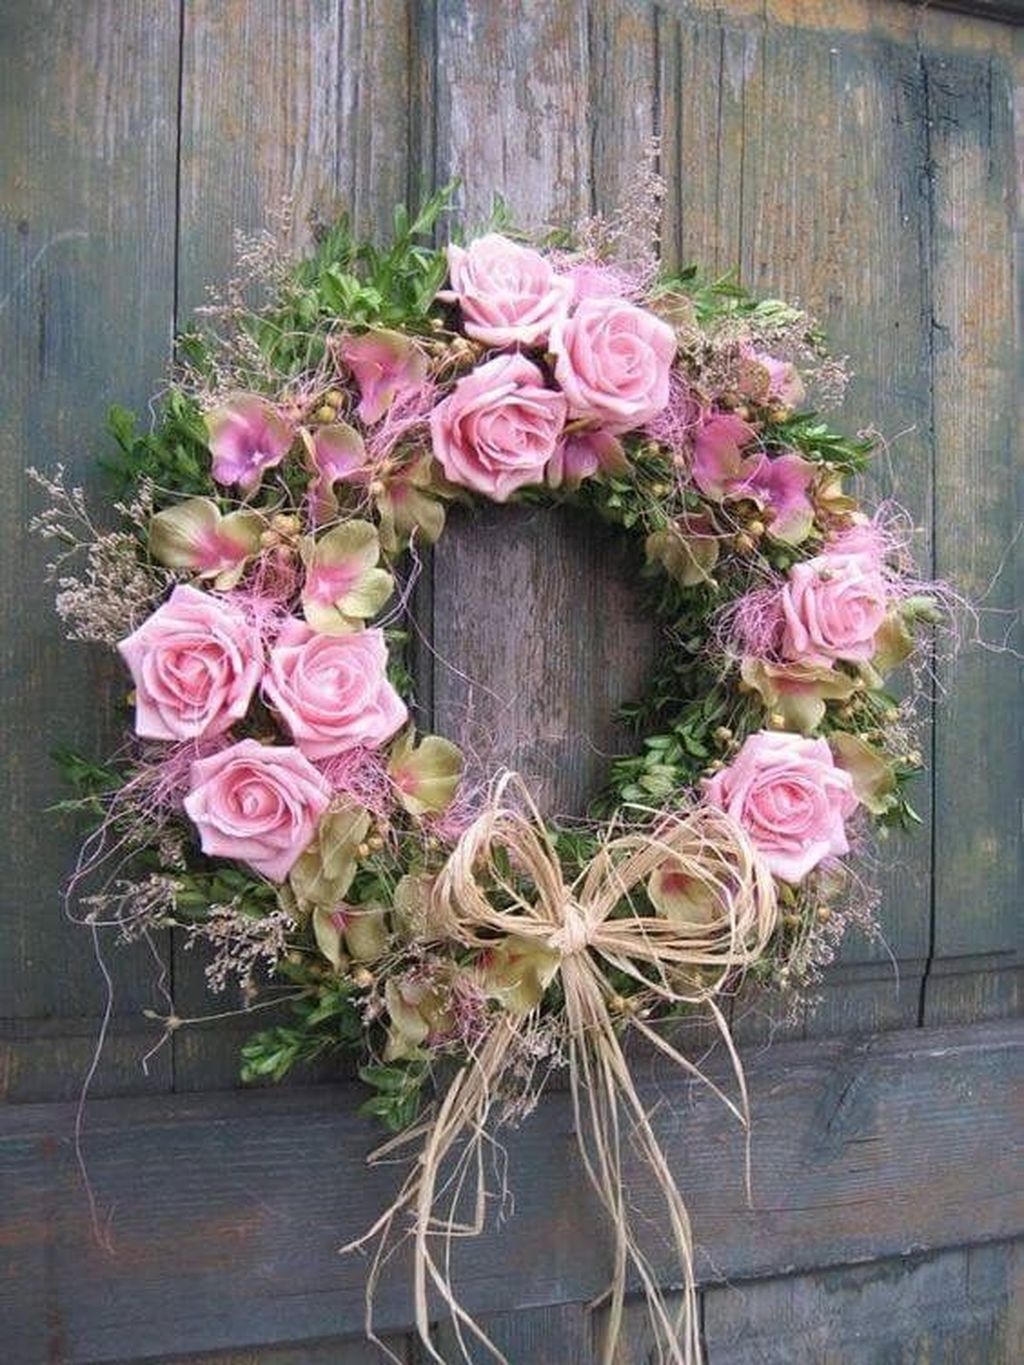 Cute Shabby Chic Valentines Decoration Ideas For Your Home 10